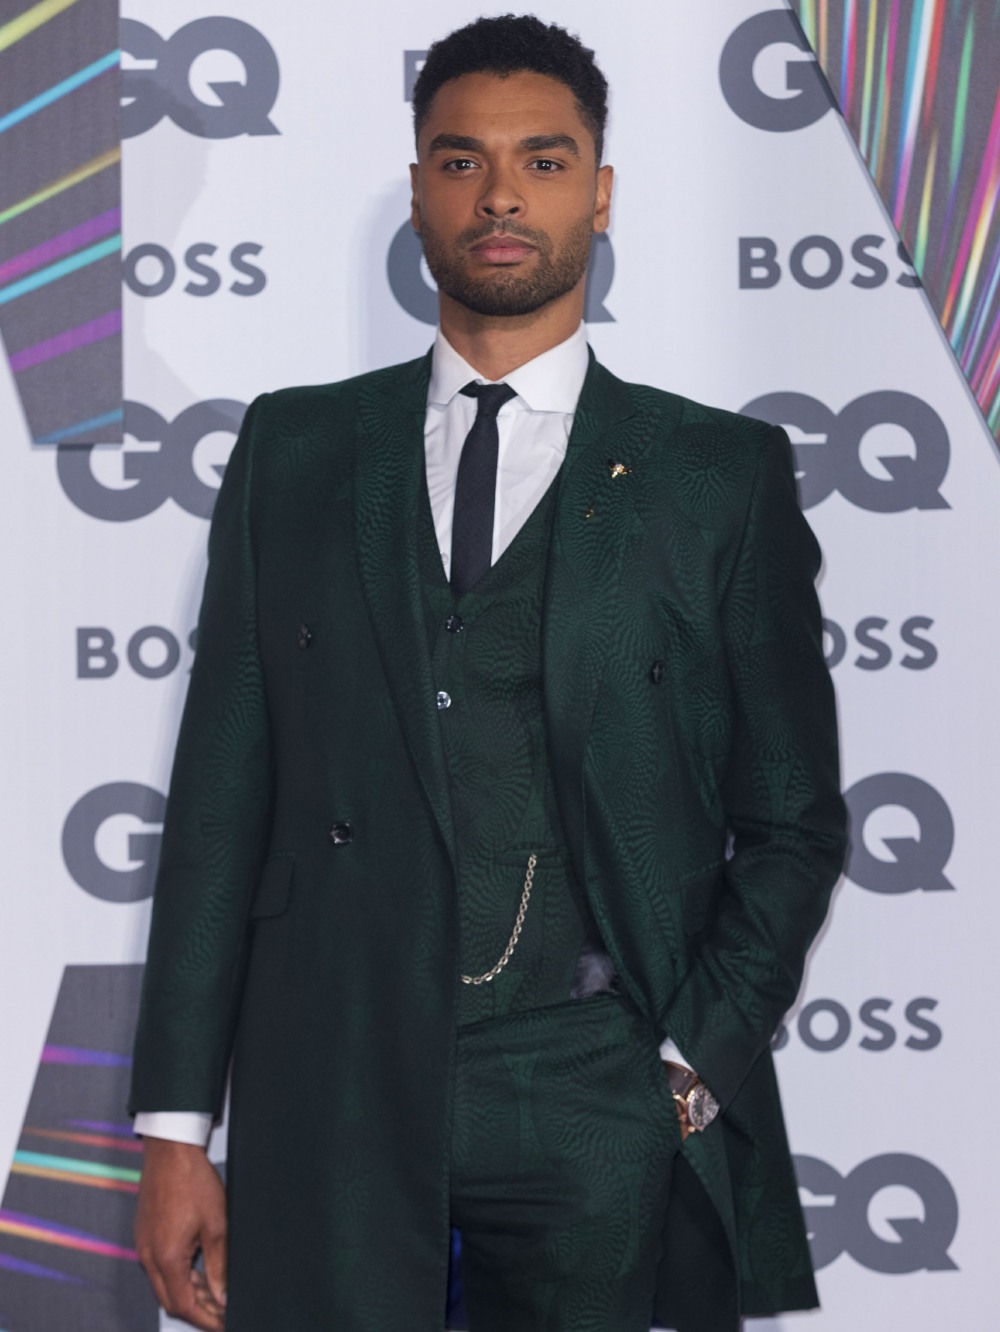 The 24th GQ Men of the Year Awards in association with BOSS at Tate Modern, London, UK